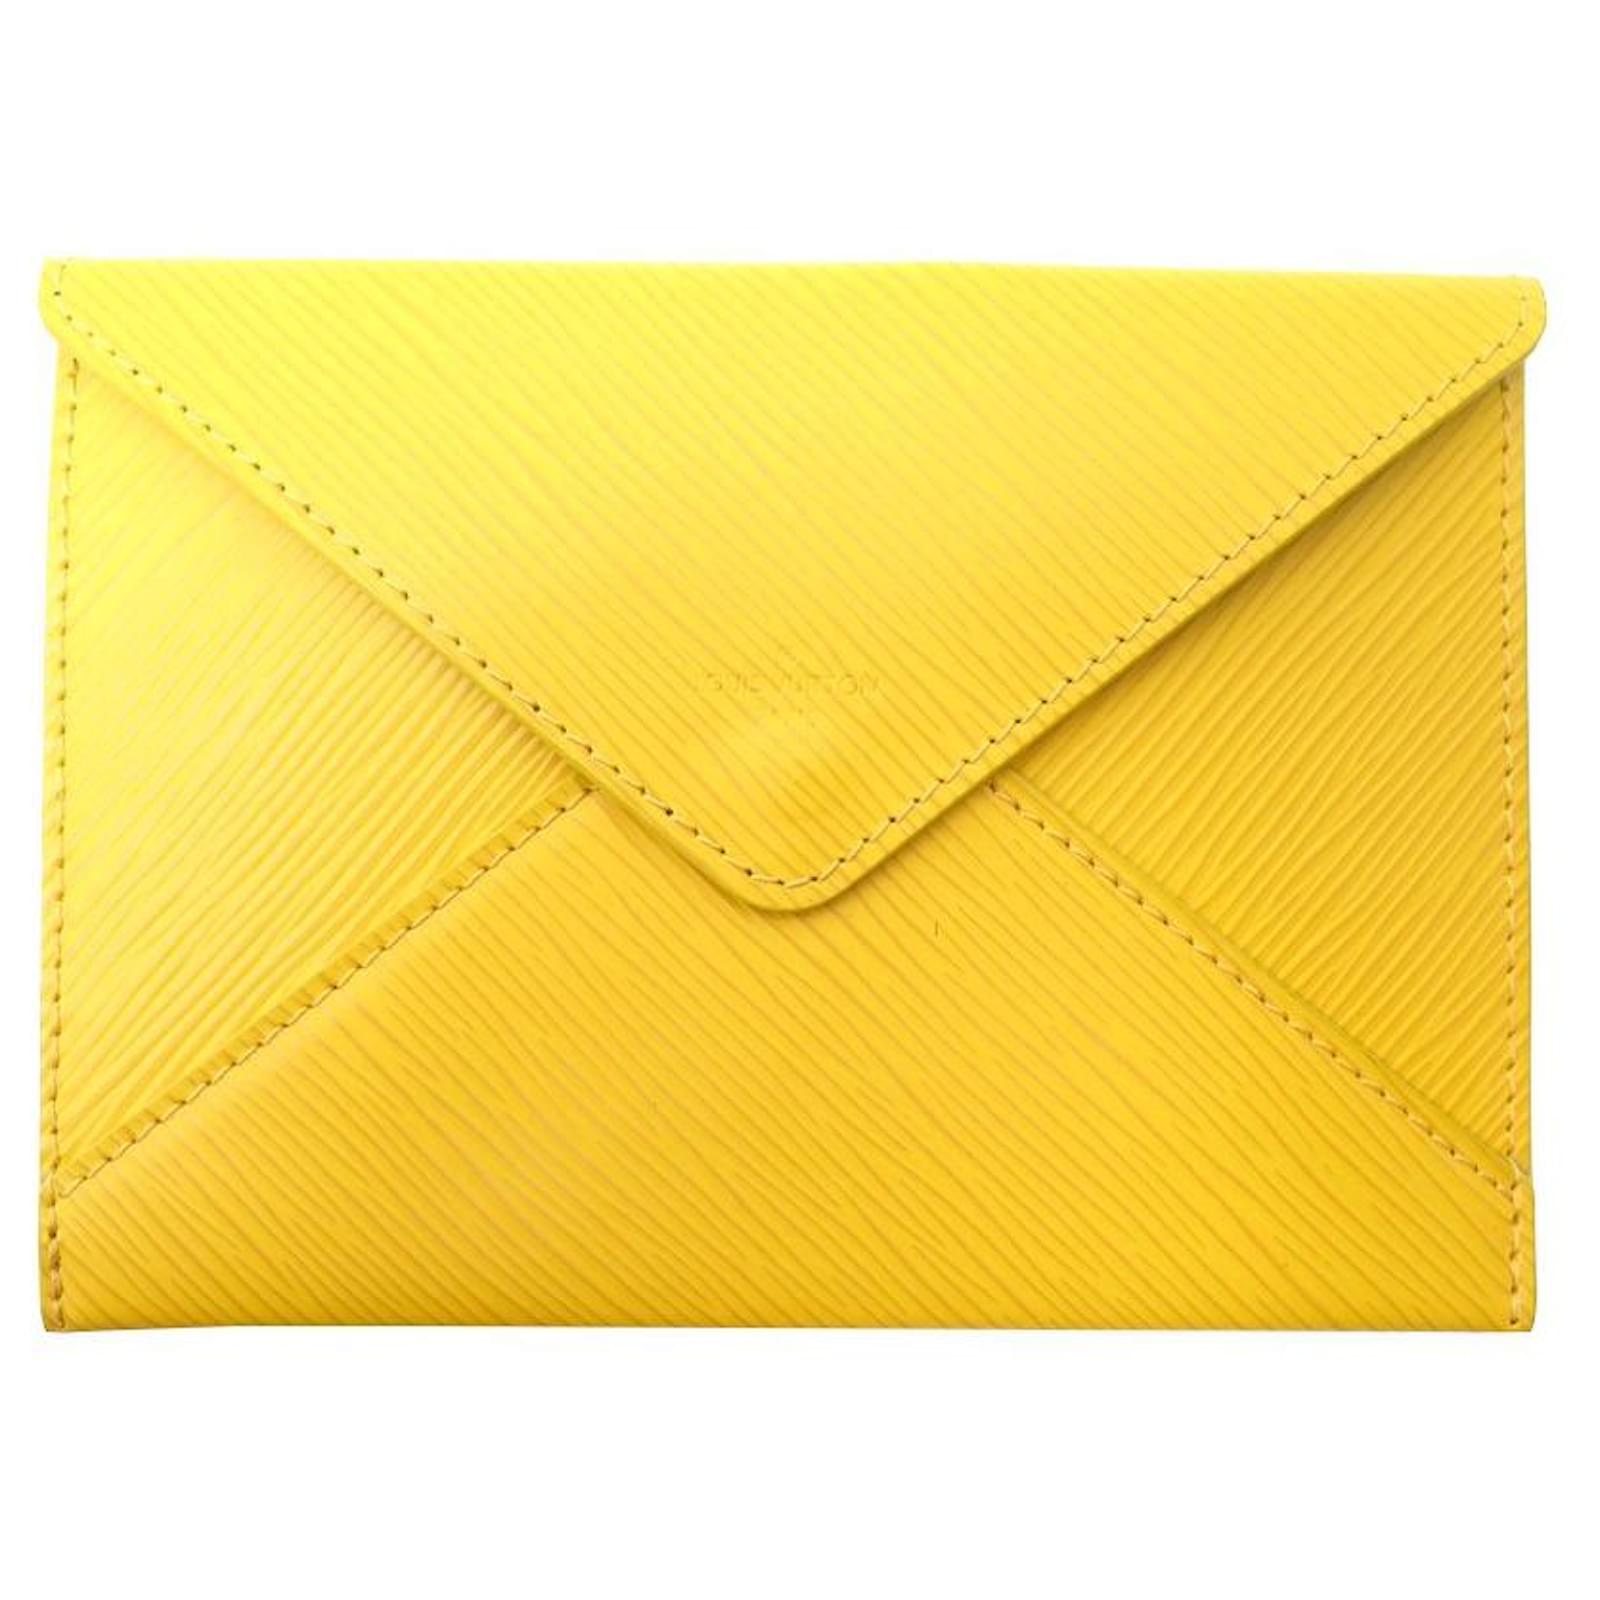 NEW LOUIS VUITTON POUCH INVITATION IN YELLOW EPI LEATHER LEATHER